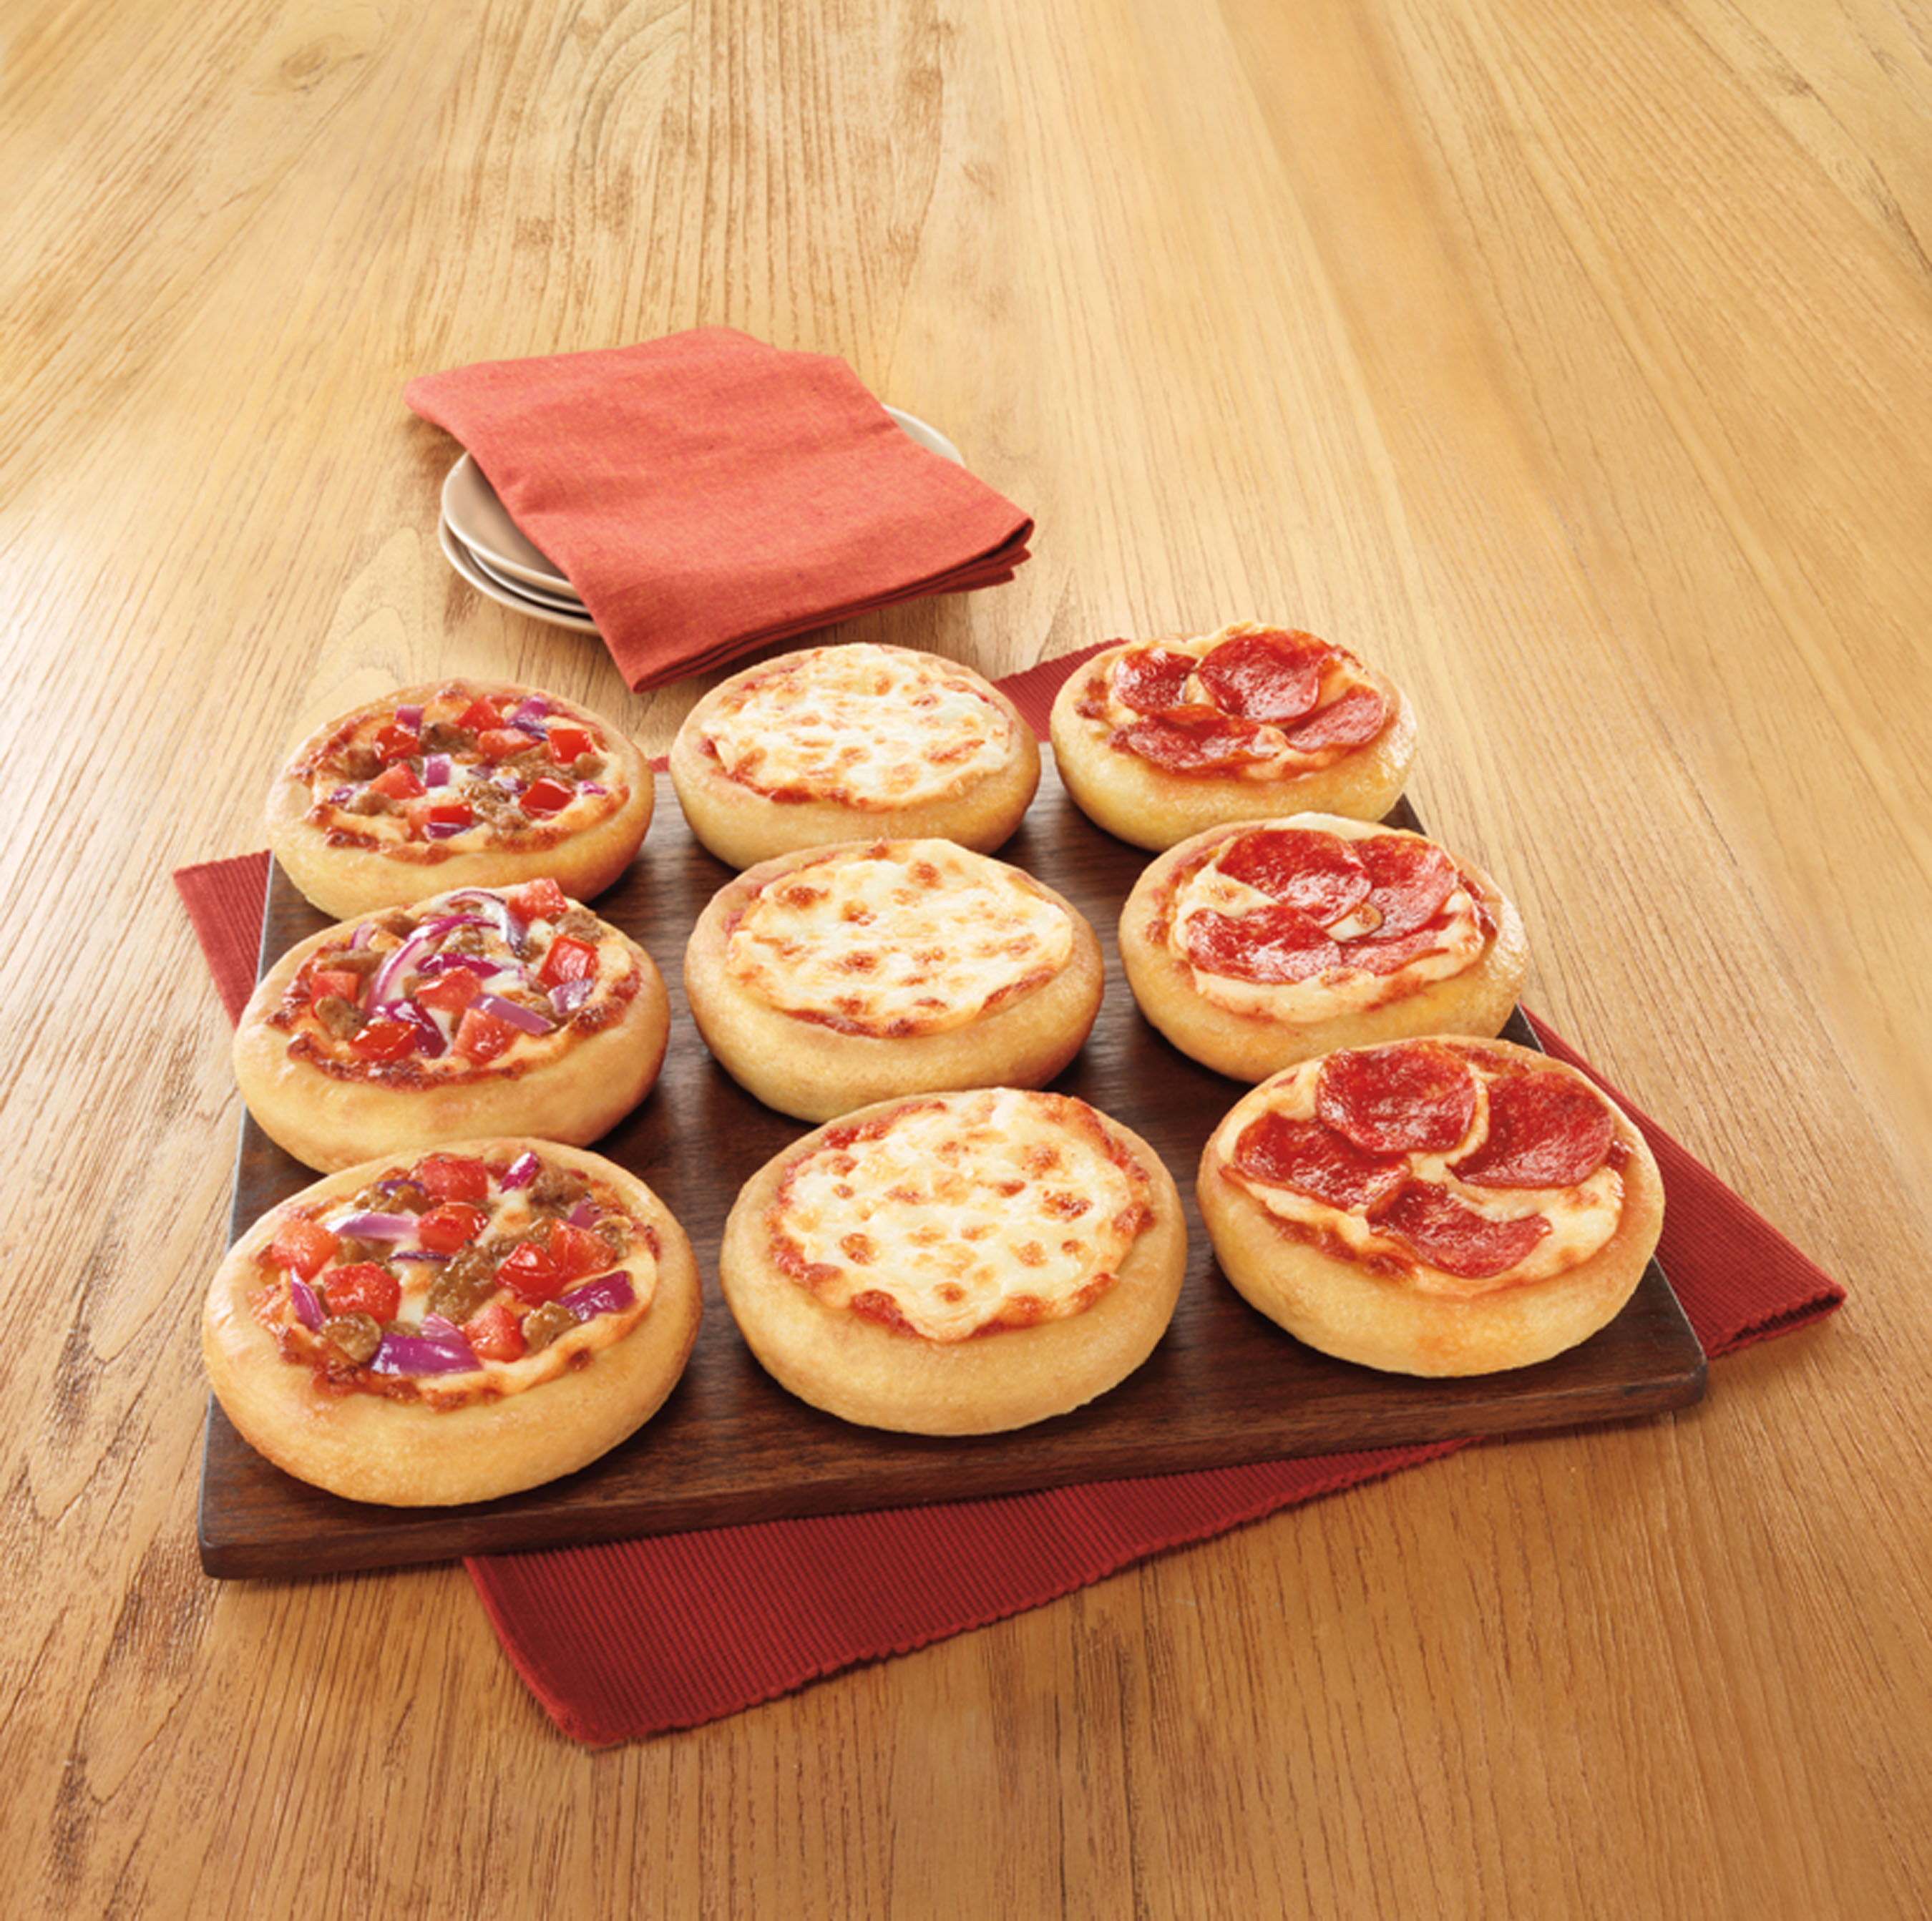 THE SECRET IS OUT: PIZZA HUT UNVEILS BIG PIZZA SLIDERS AS LATEST INNOVATION, GIVES CUSTOMERS A CHANCE TO TRY ONE FREE. (PRNewsFoto/Pizza Hut) (PRNewsFoto/PIZZA HUT)